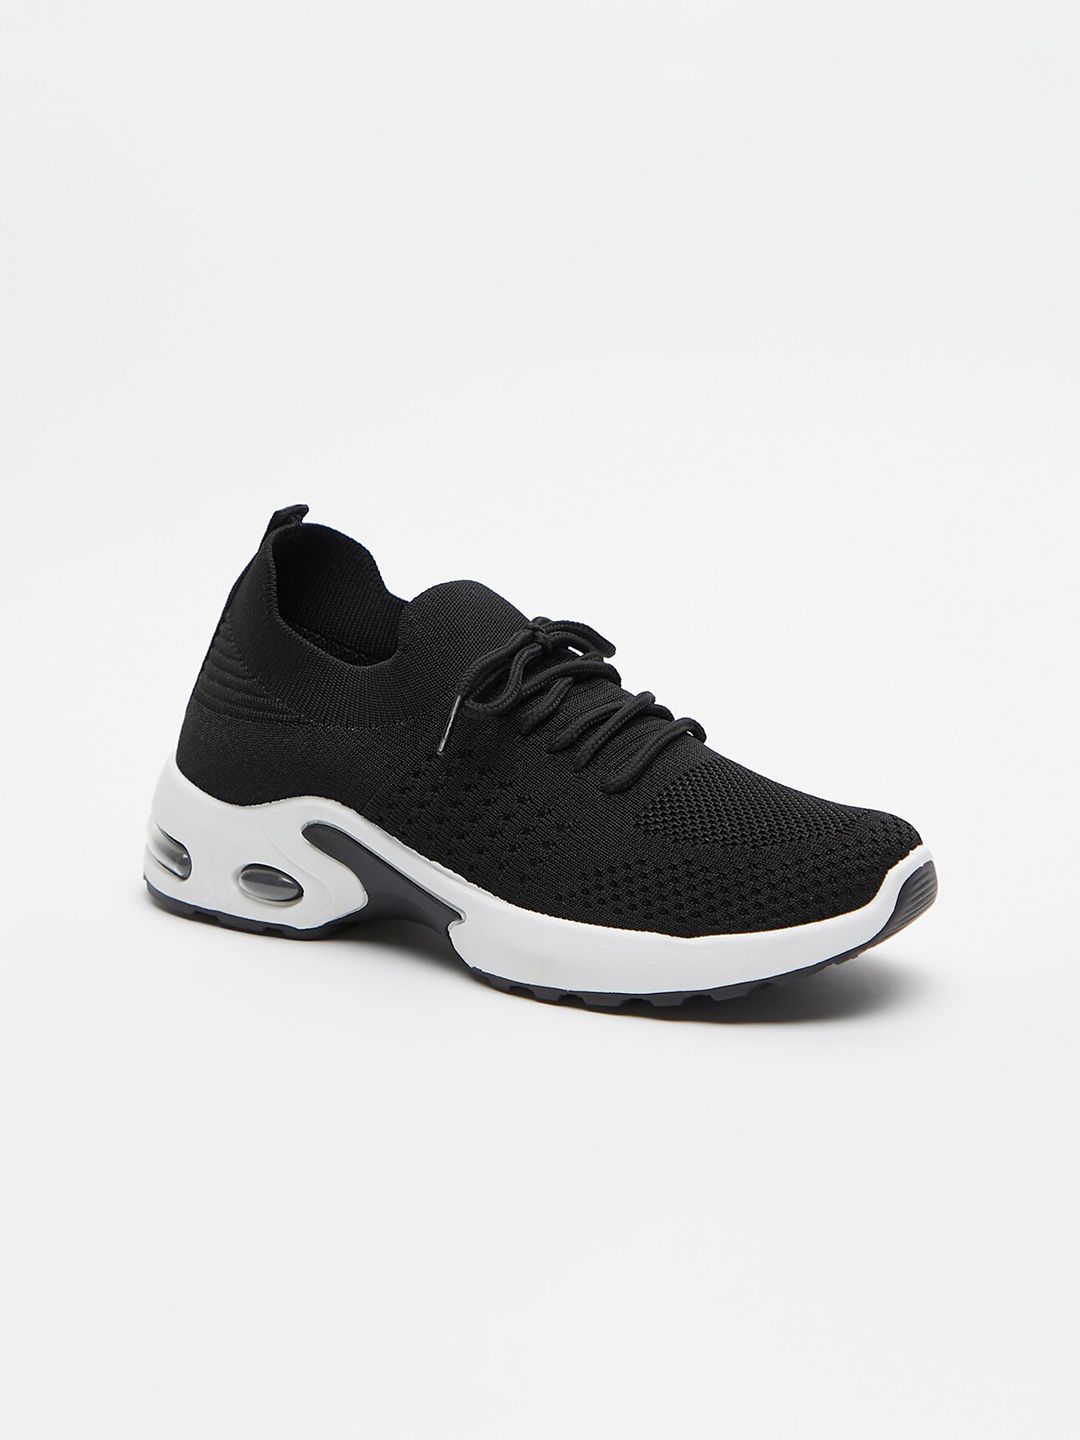 shoexpress Women Black Textile Training or Gym Non-Marking Shoes Price in India